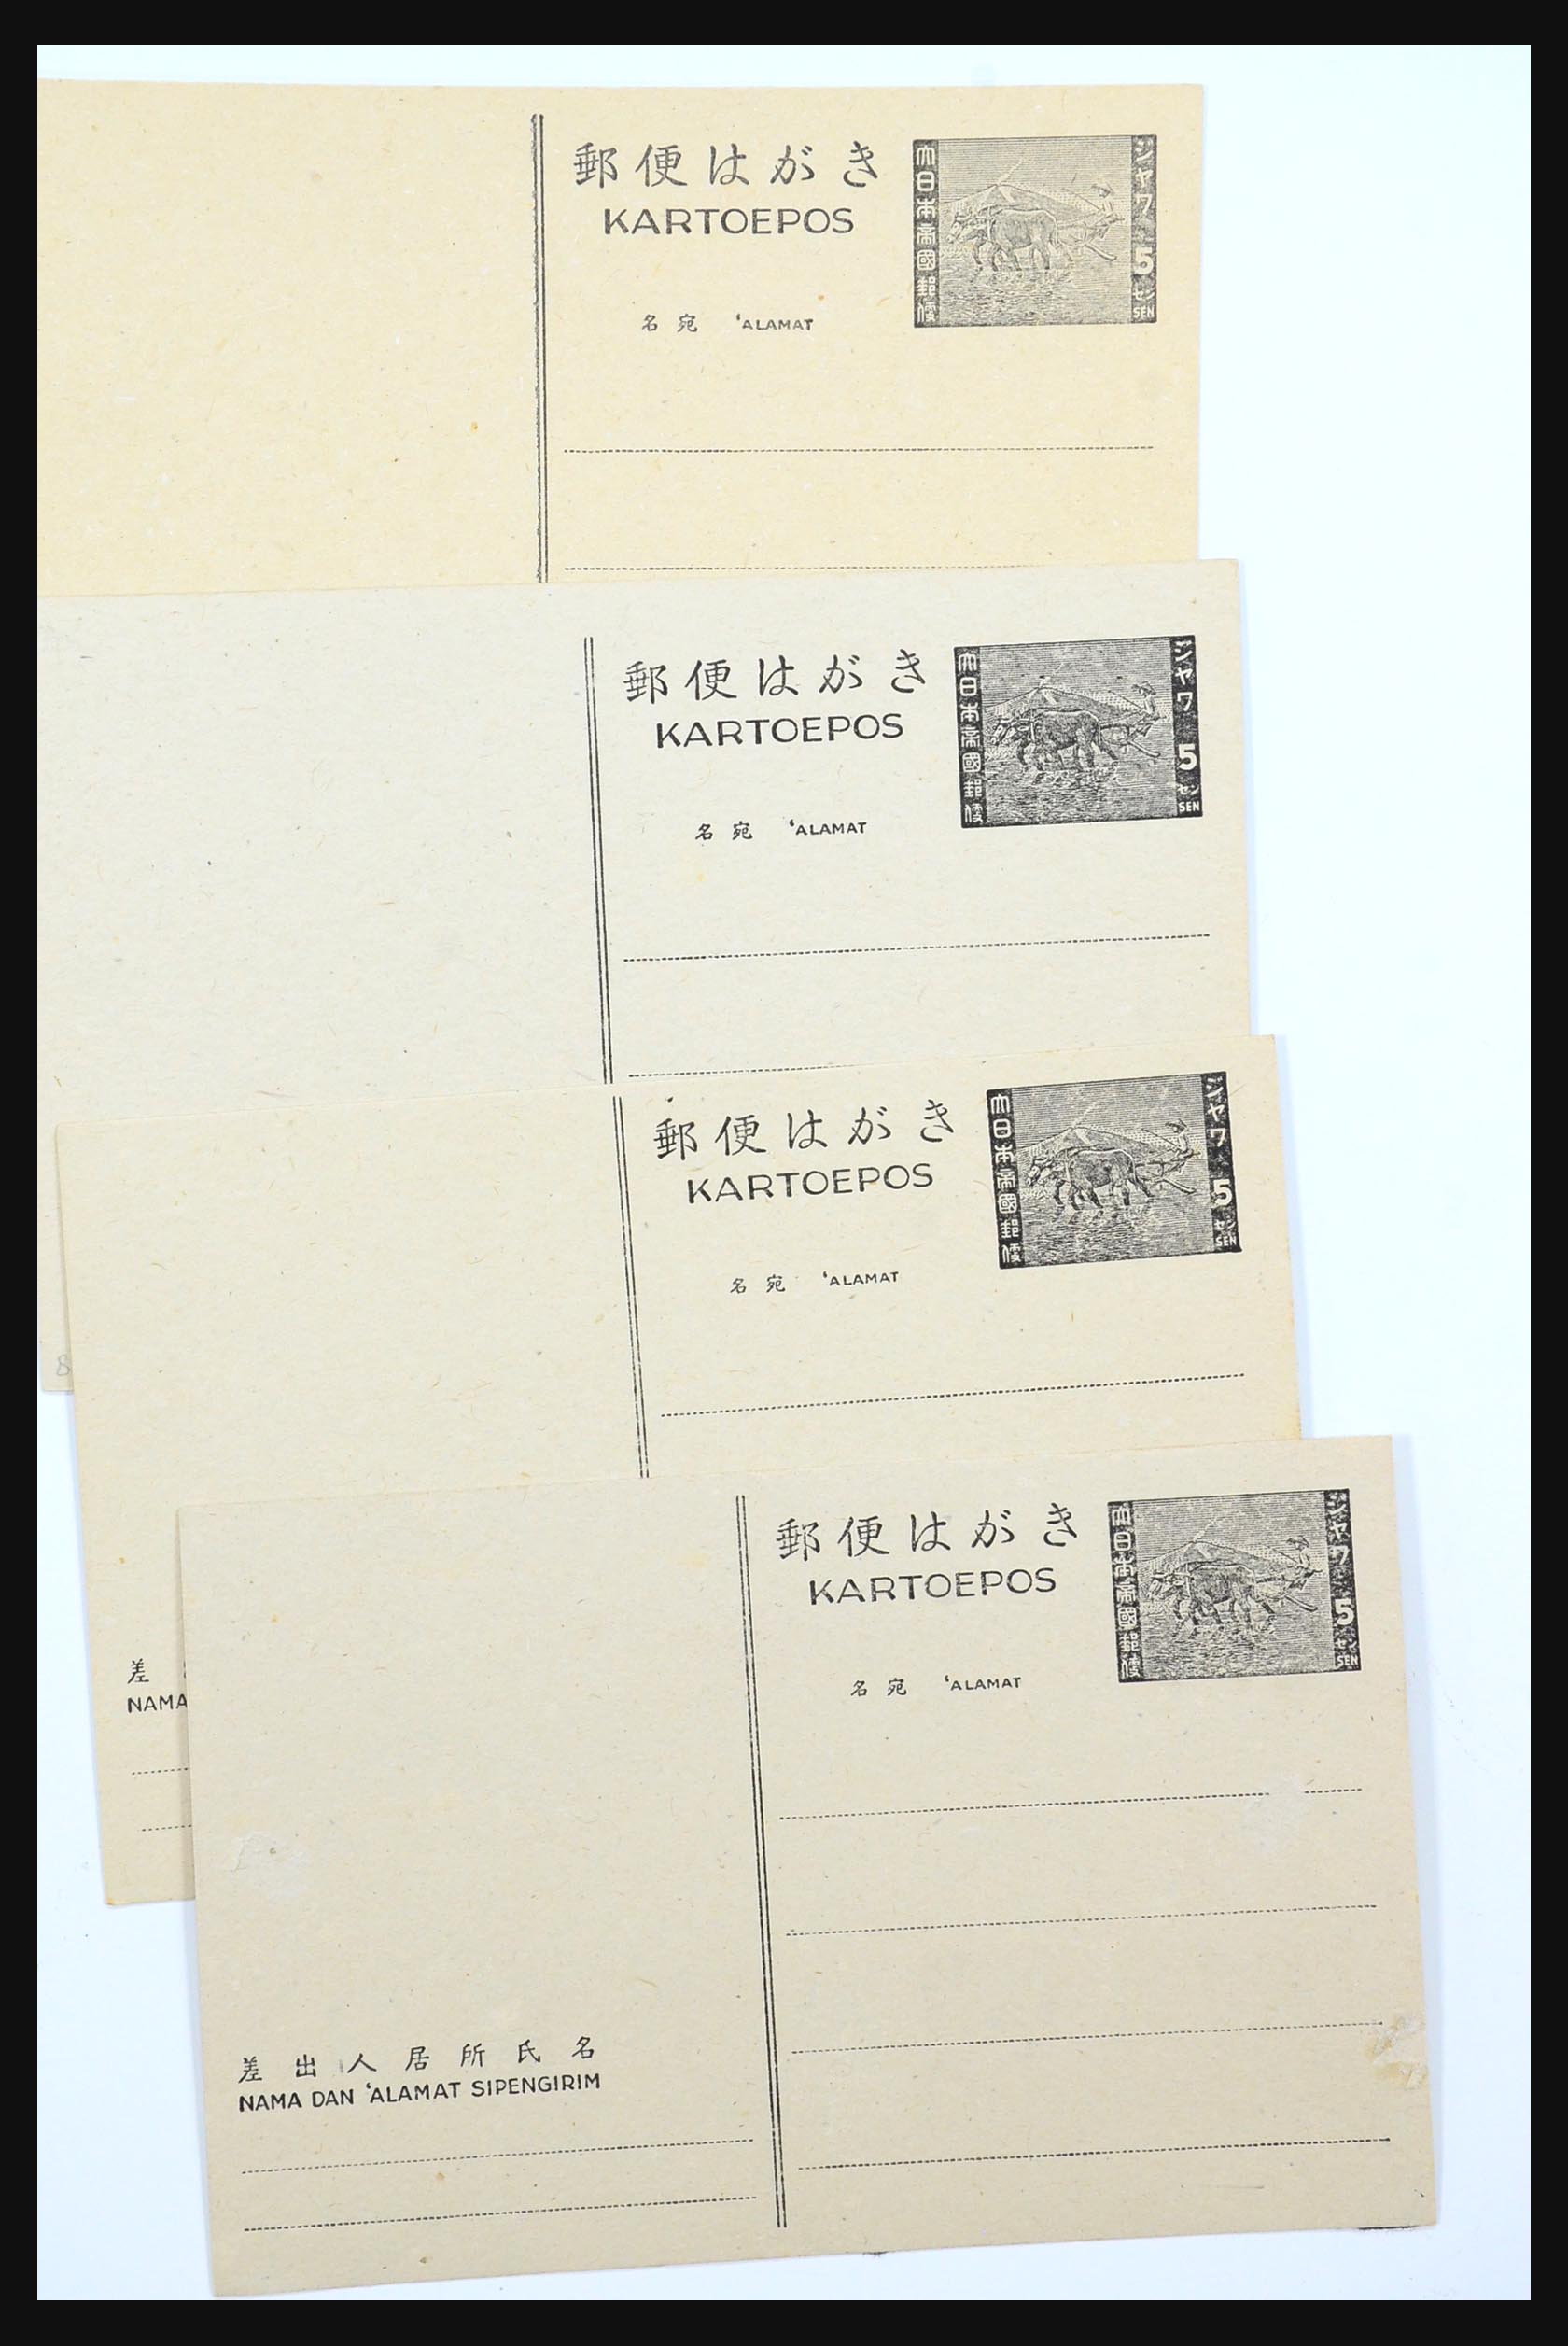 31362 076 - 31362 Netherlands Indies Japanese occupation covers 1942-1945.